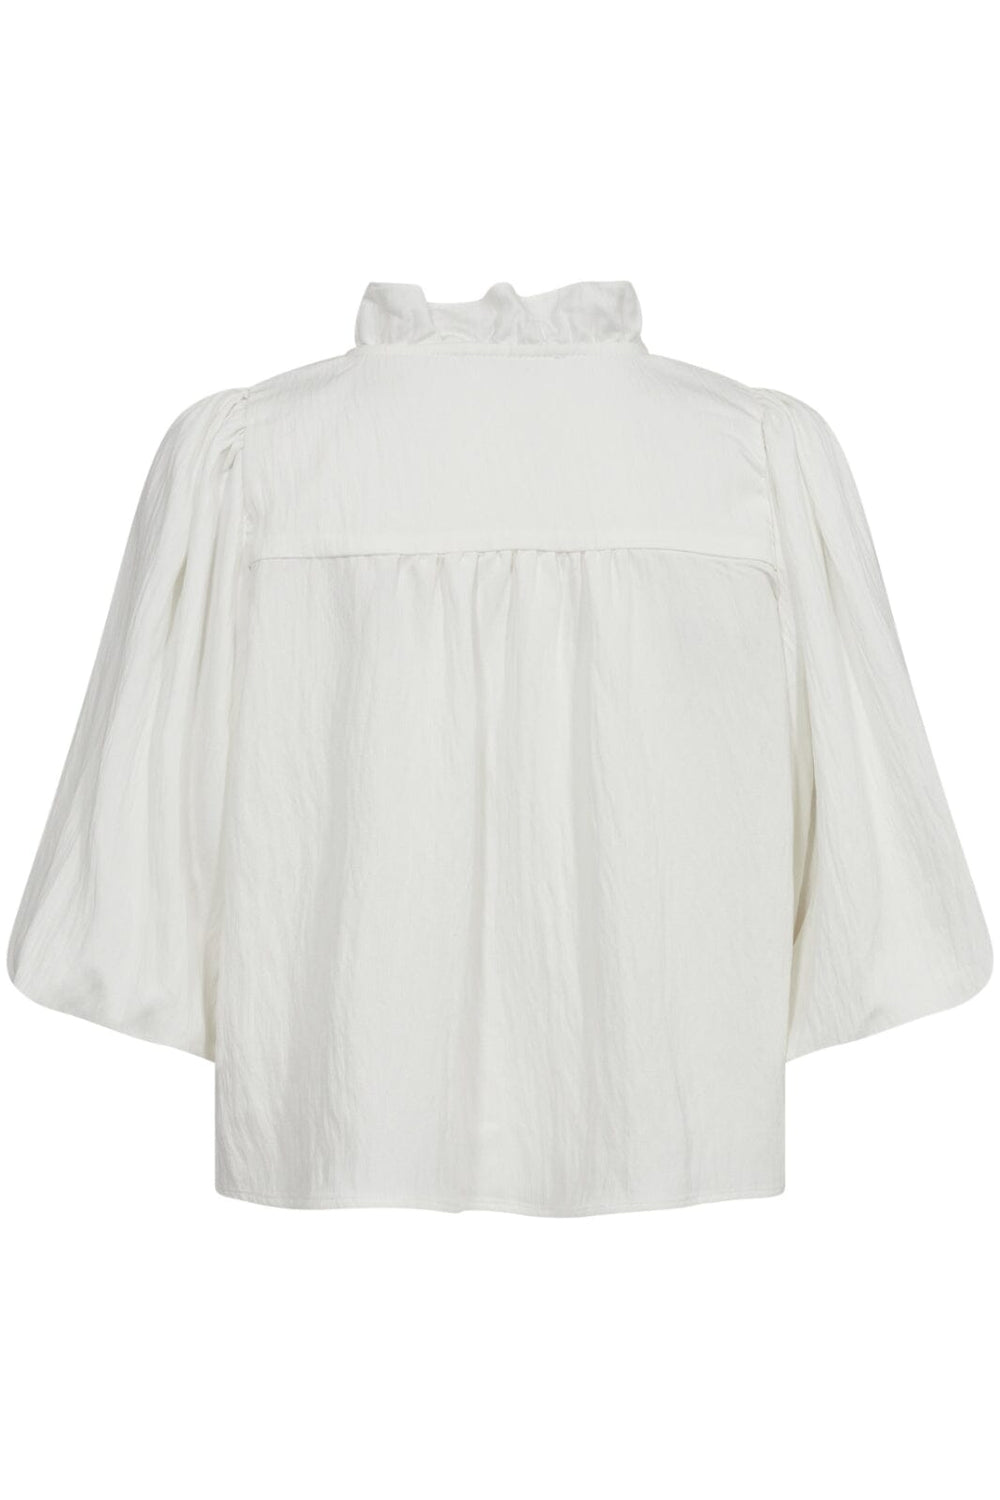 Co´couture - Suedacc Puff Ss Blouse 35442 - 4000 White Bluser 